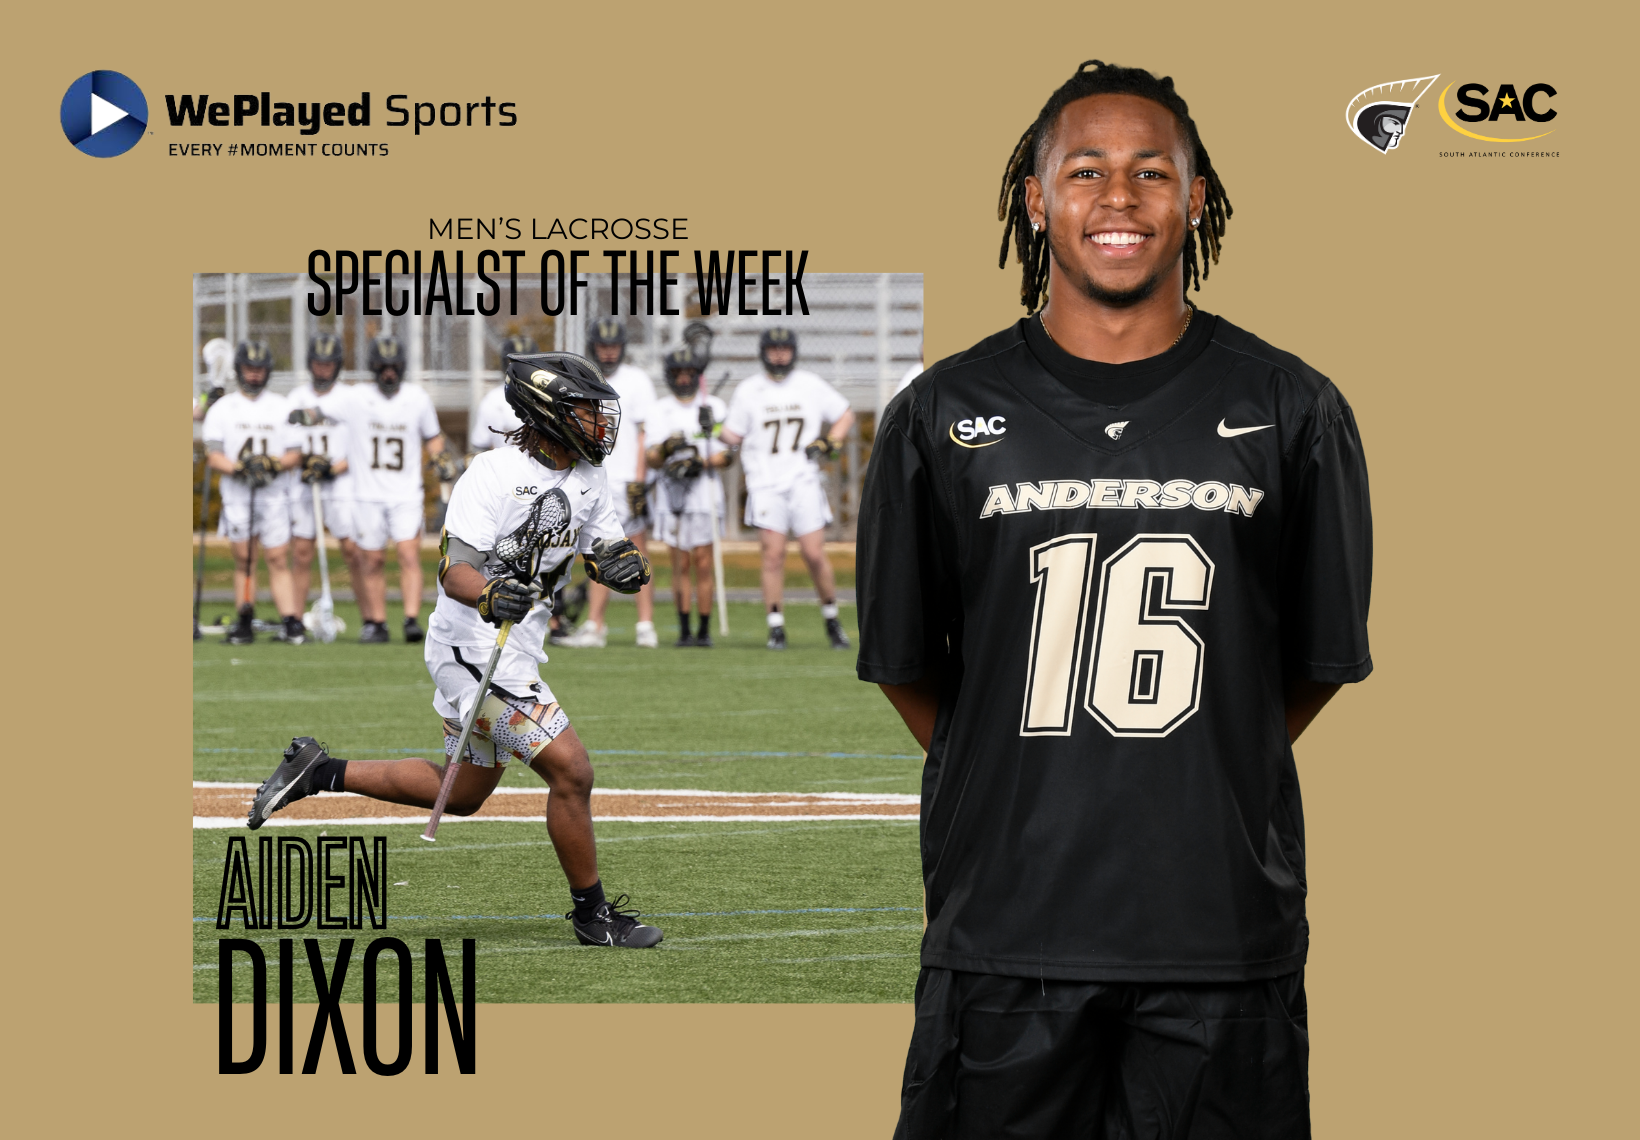 Dixon Named WePlayed Sports Men's Lacrosse Specialist of the Week